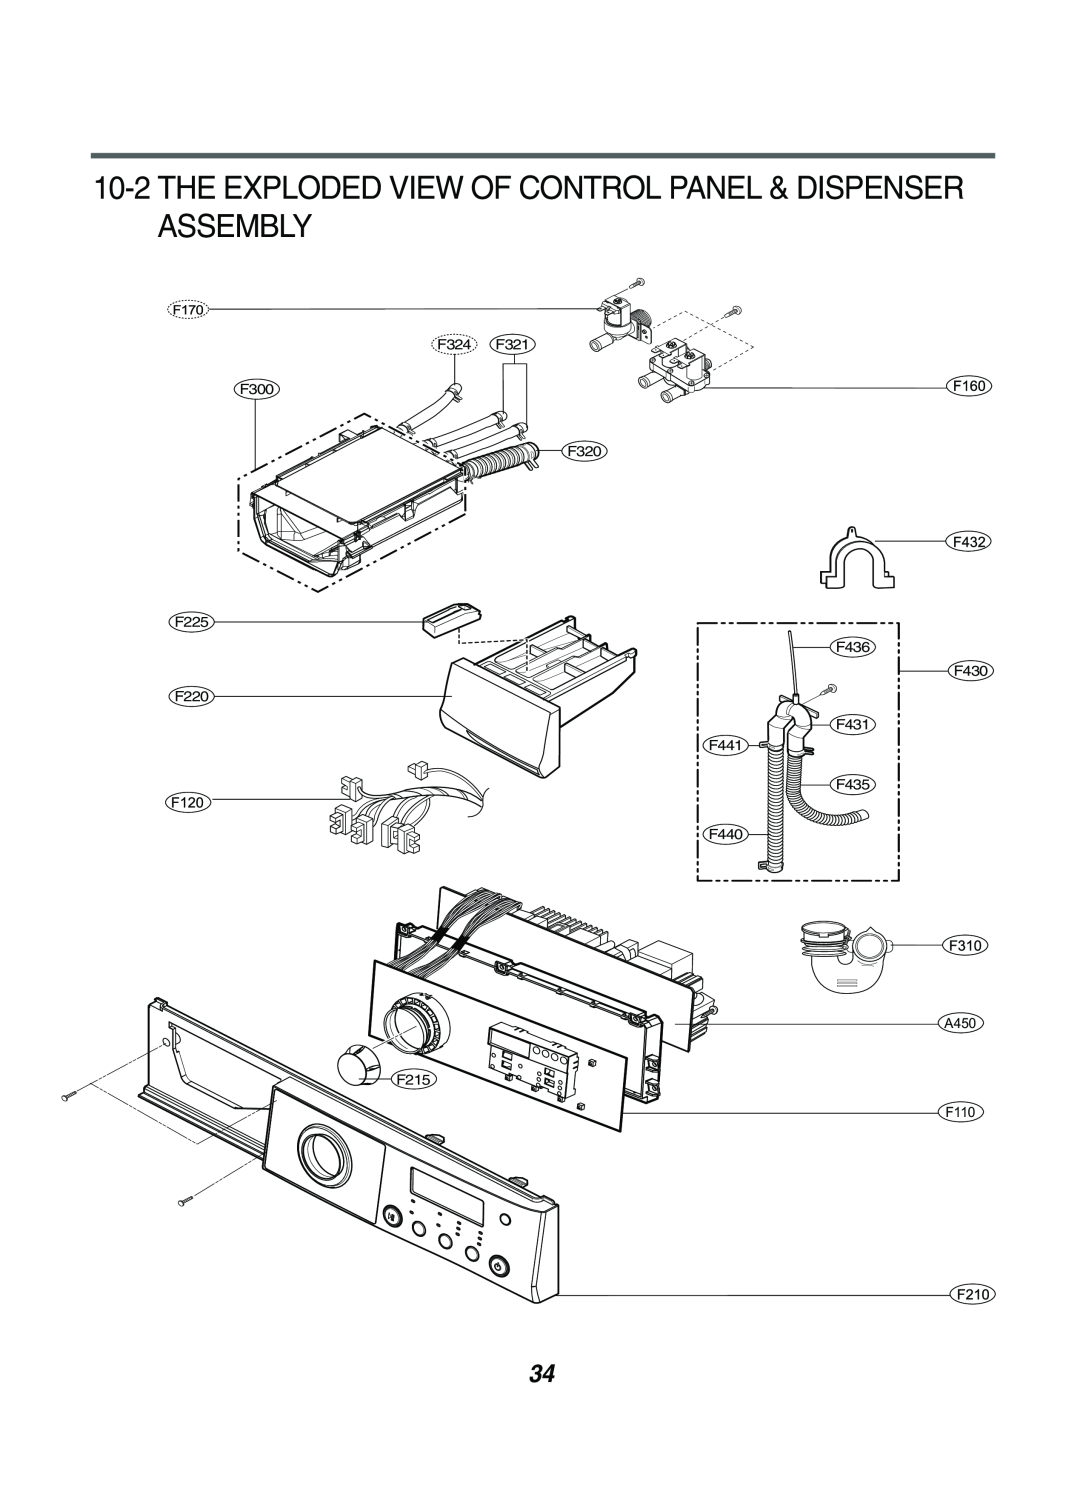 LG Electronics WD(M)-14220(5)FD The Exploded View Of Control Panel & Dispenser Assembly, F324 F321 F300 F320 F225 F220 